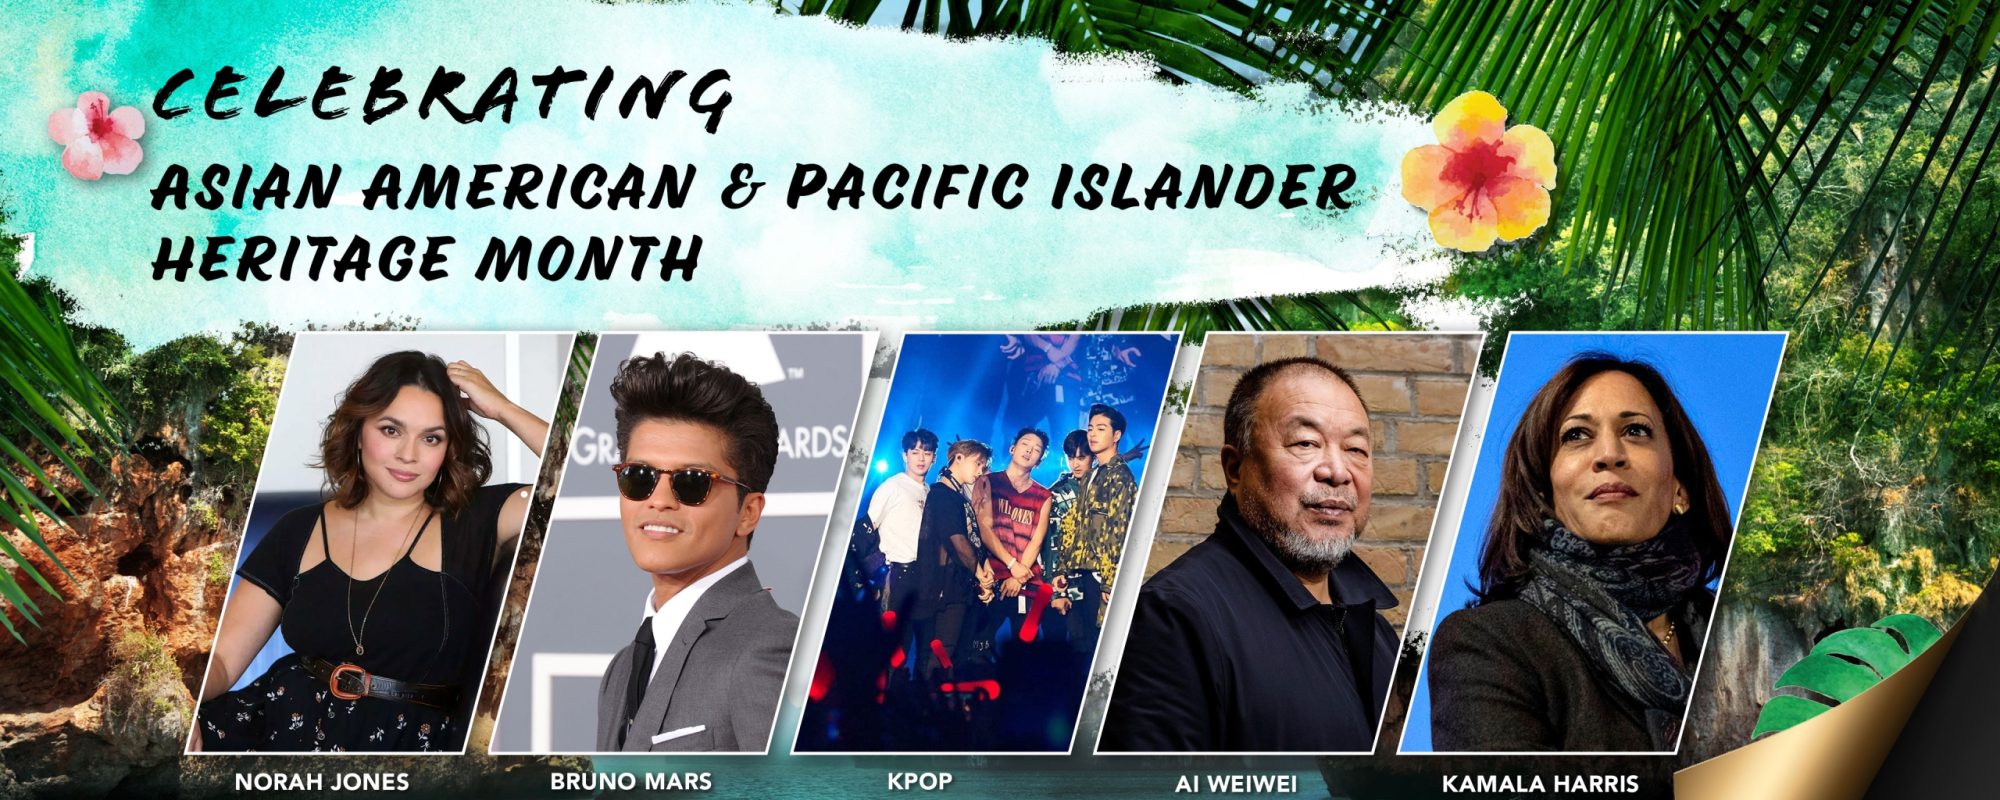 OVATION TV CELEBRATES ASIAN AMERICAN & PACIFIC ISLANDER HERITAGE MONTH IN MAY WITH WEEKLY “RED CARPET CINEMA” CELEBRATIONS, WEEKLY “MORNING CANVAS” BLOCKS, AND A CURATED ON-DEMAND PROGRAMMING LINEUP